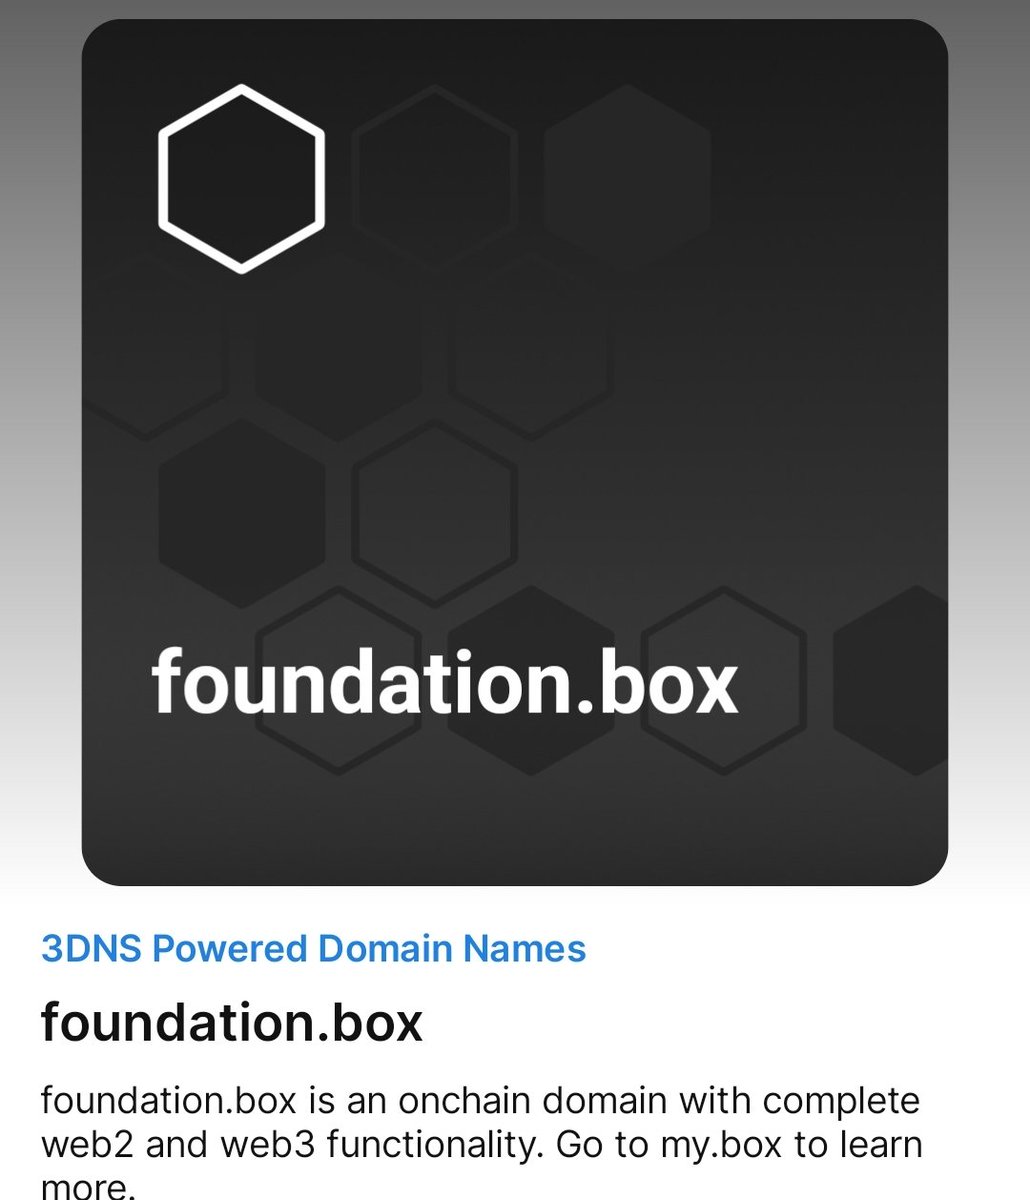 I just registered my first BOX Domain.
I hope to sell my first domain,I now have many ENS DOMAINS ,but haven't sold one yet!!
#Box #boxdomain #Domains #domainsforsale #ENS #DNS #WEB3
#WEB2 #foundation #mybox #NFT #Ethereum